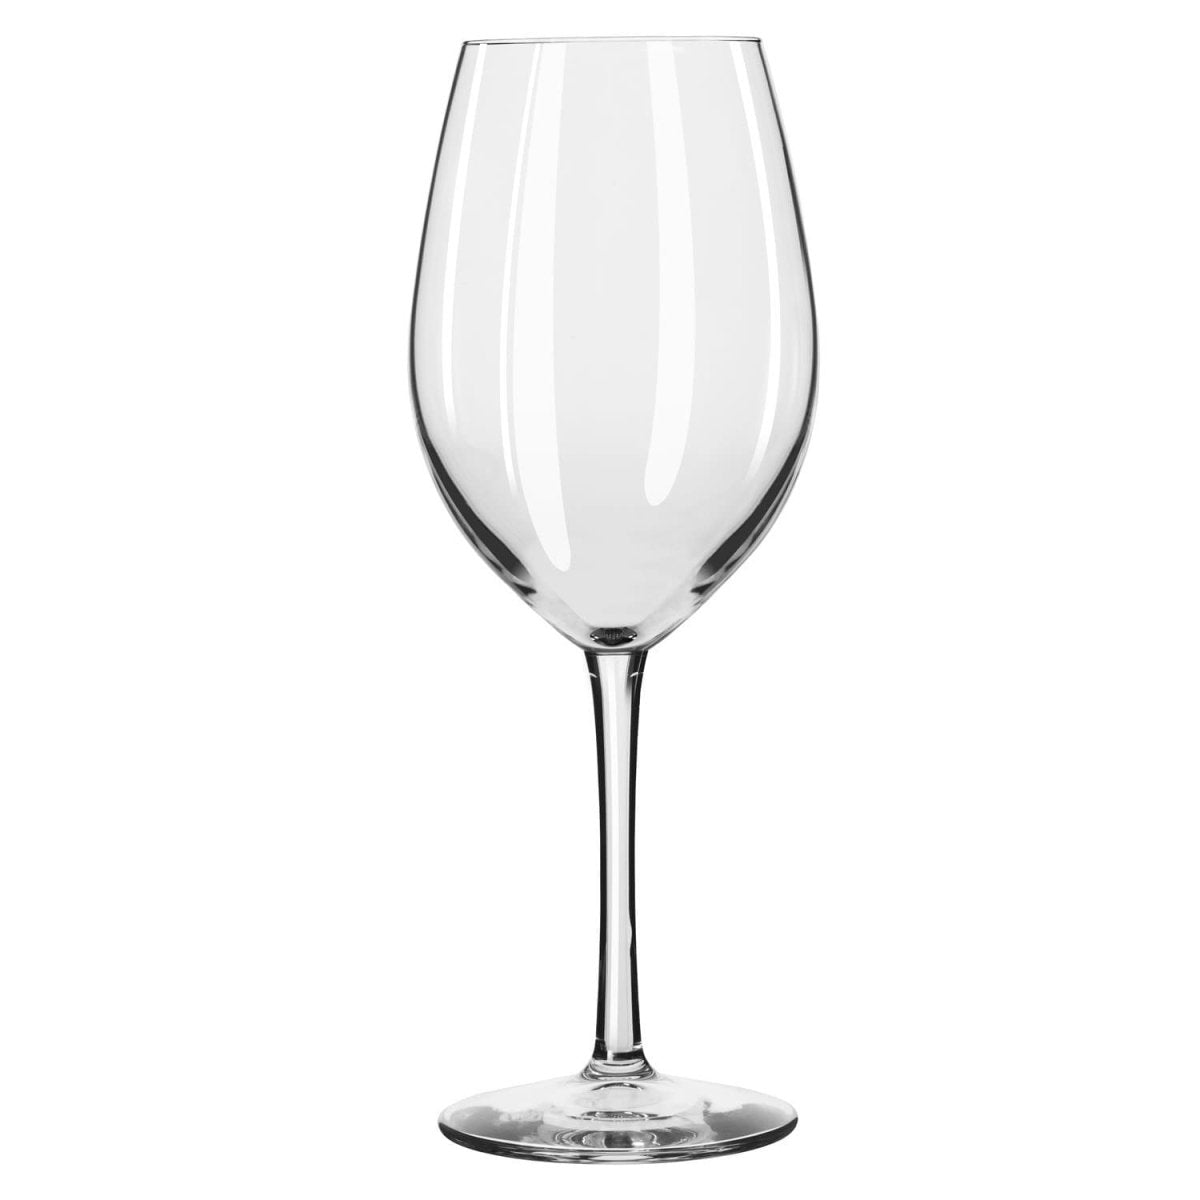 Drinking Glasses Set of 12, Durable Glassware Set Includes 6-17oz